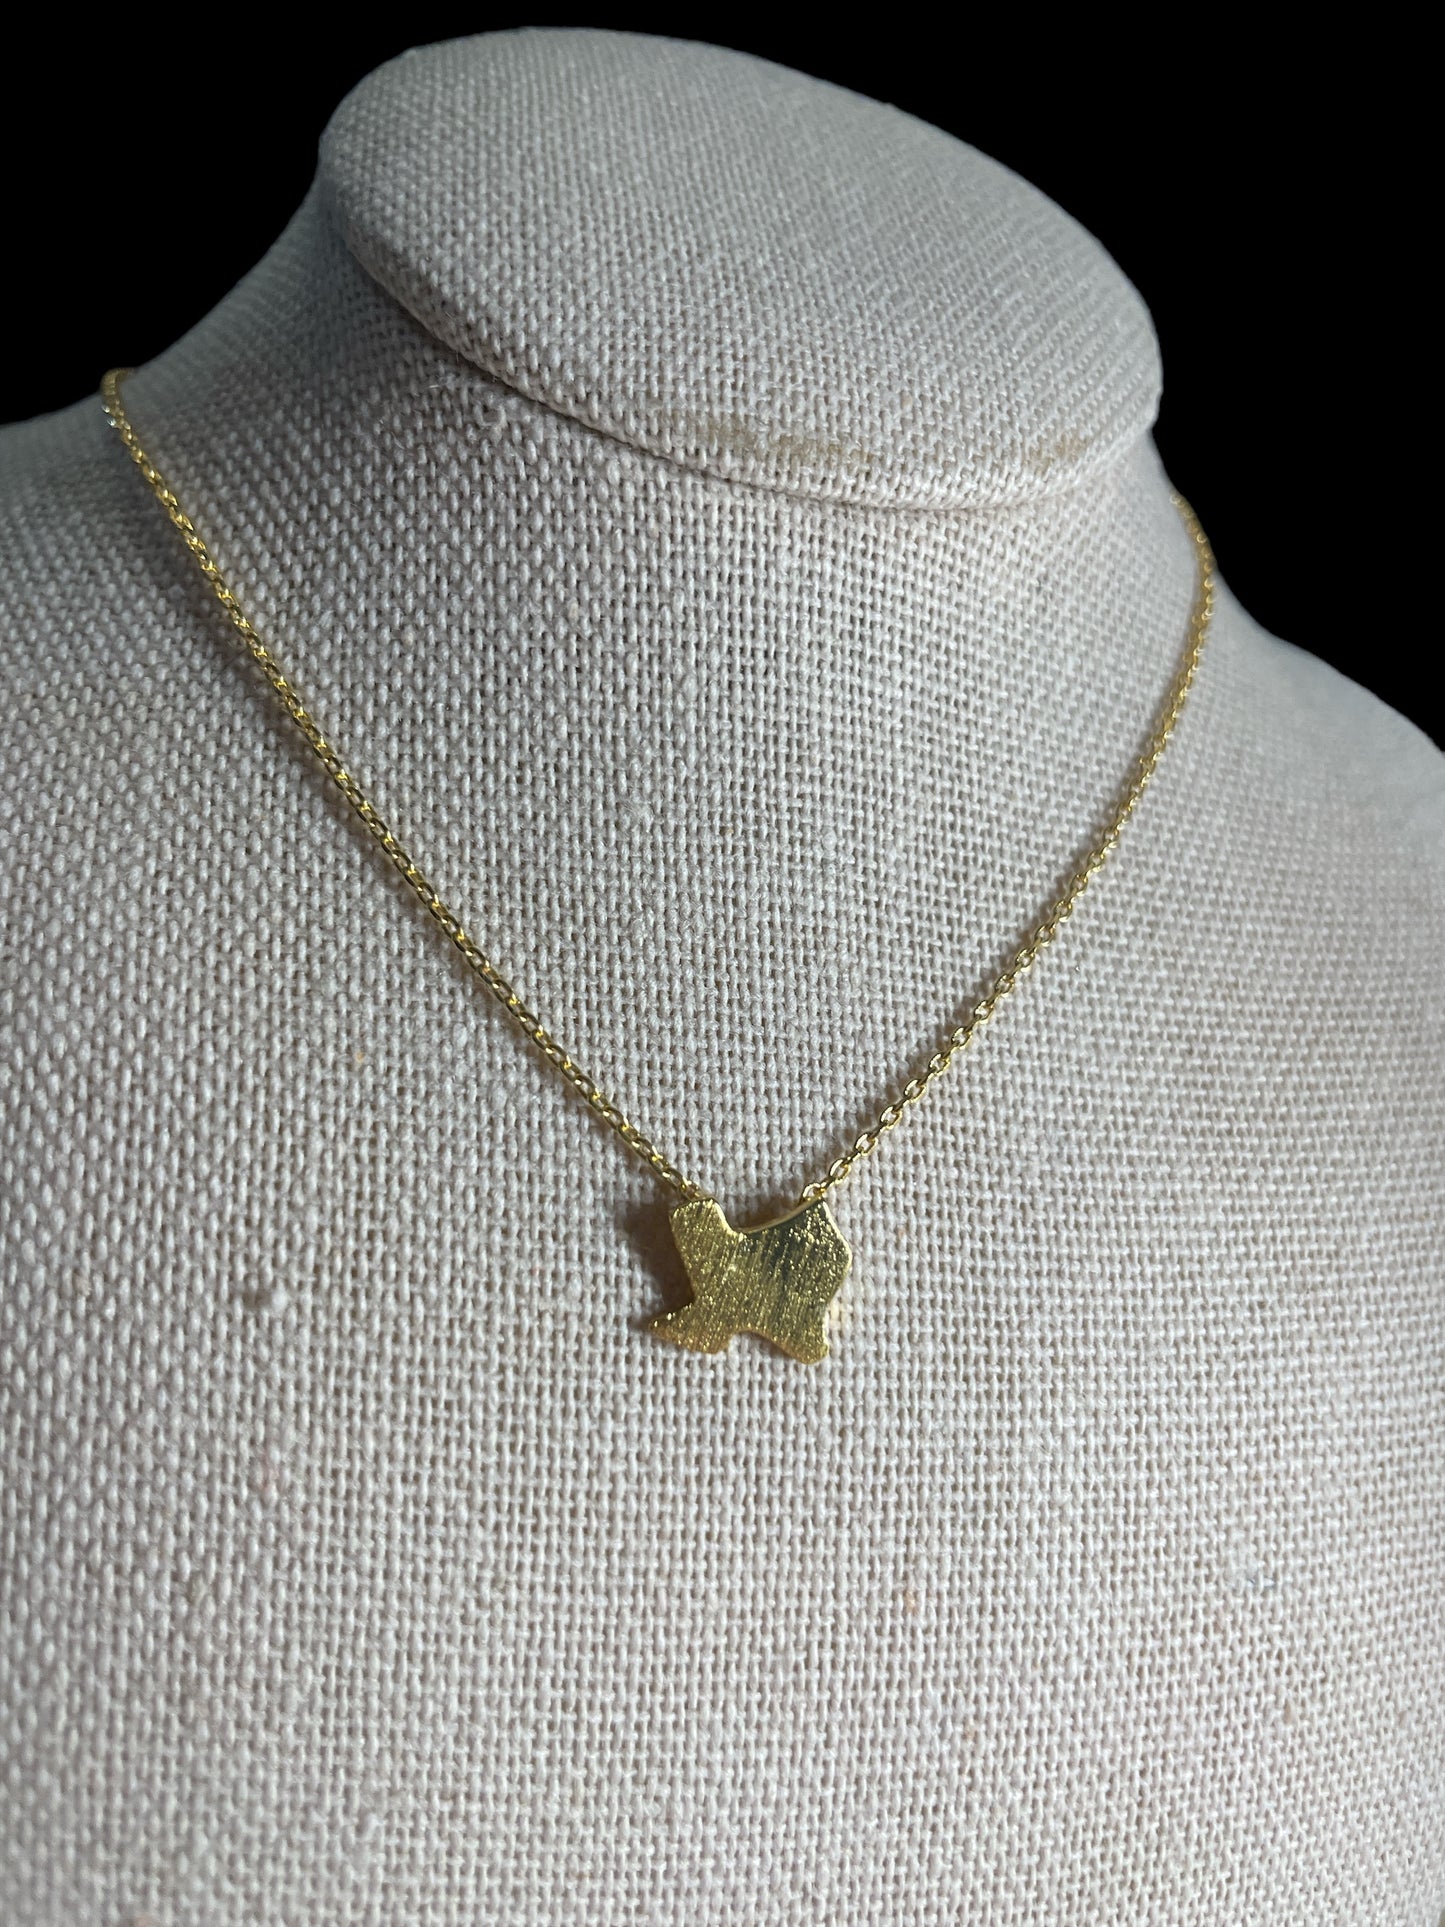 Dainty Small Texas-Shaped Necklace